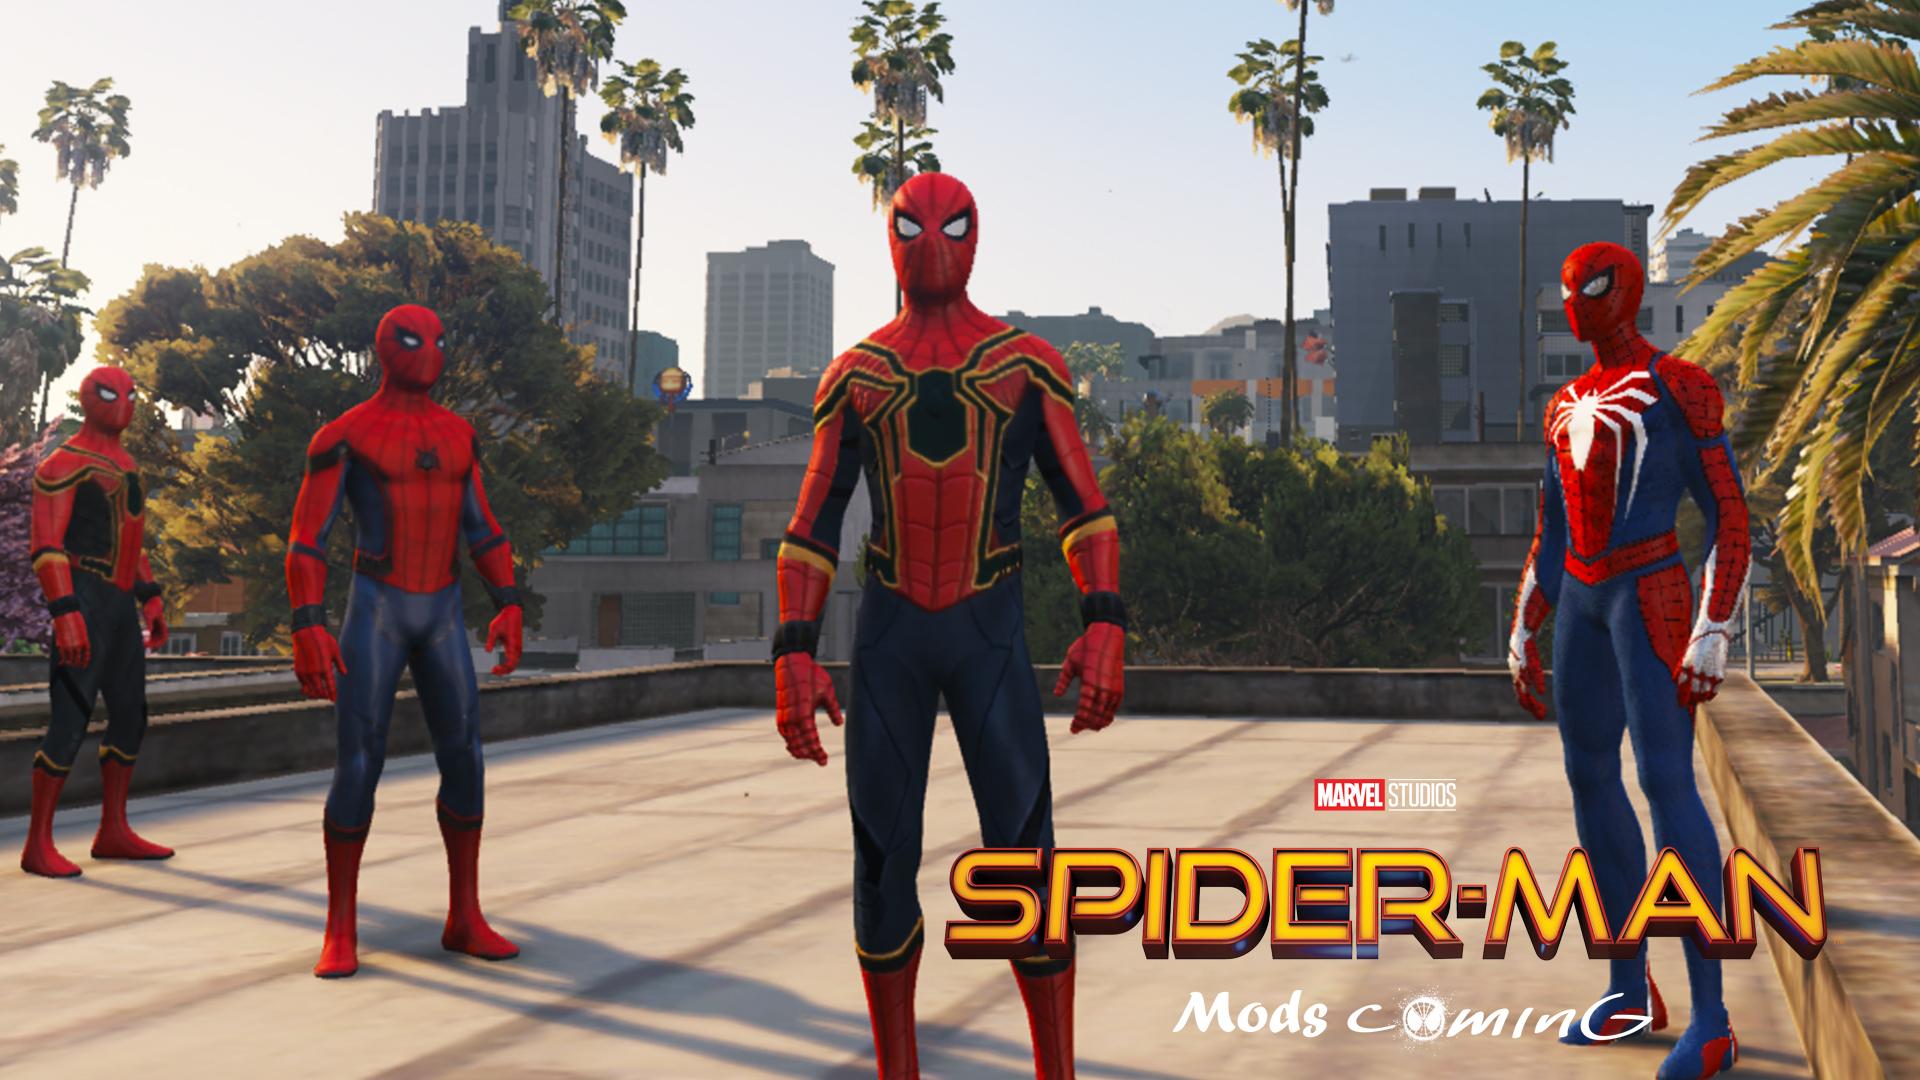 Spiderman mods coming Pack (Infinity War, Home-coming 